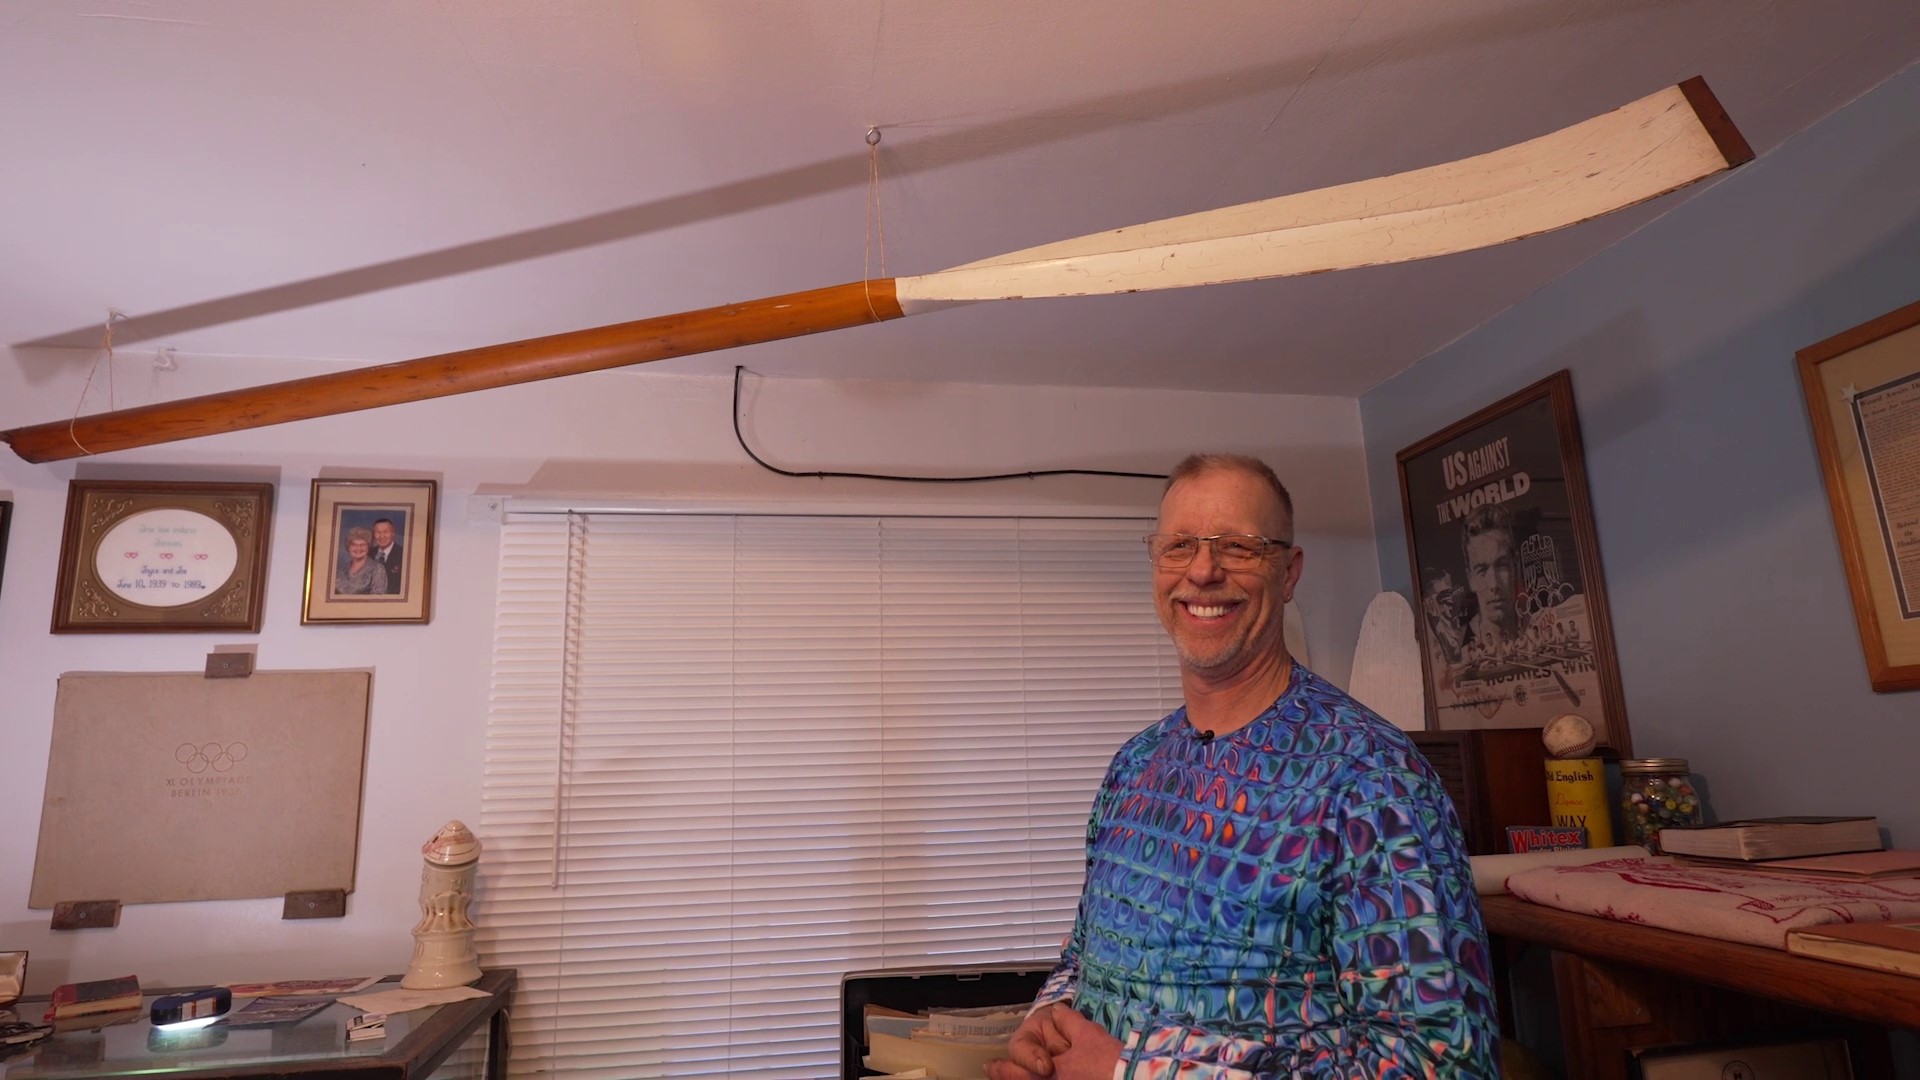 Joe Rantz's grandson shares a look inside the house the Olympic gold-winning rower called home for decades. #k5evening